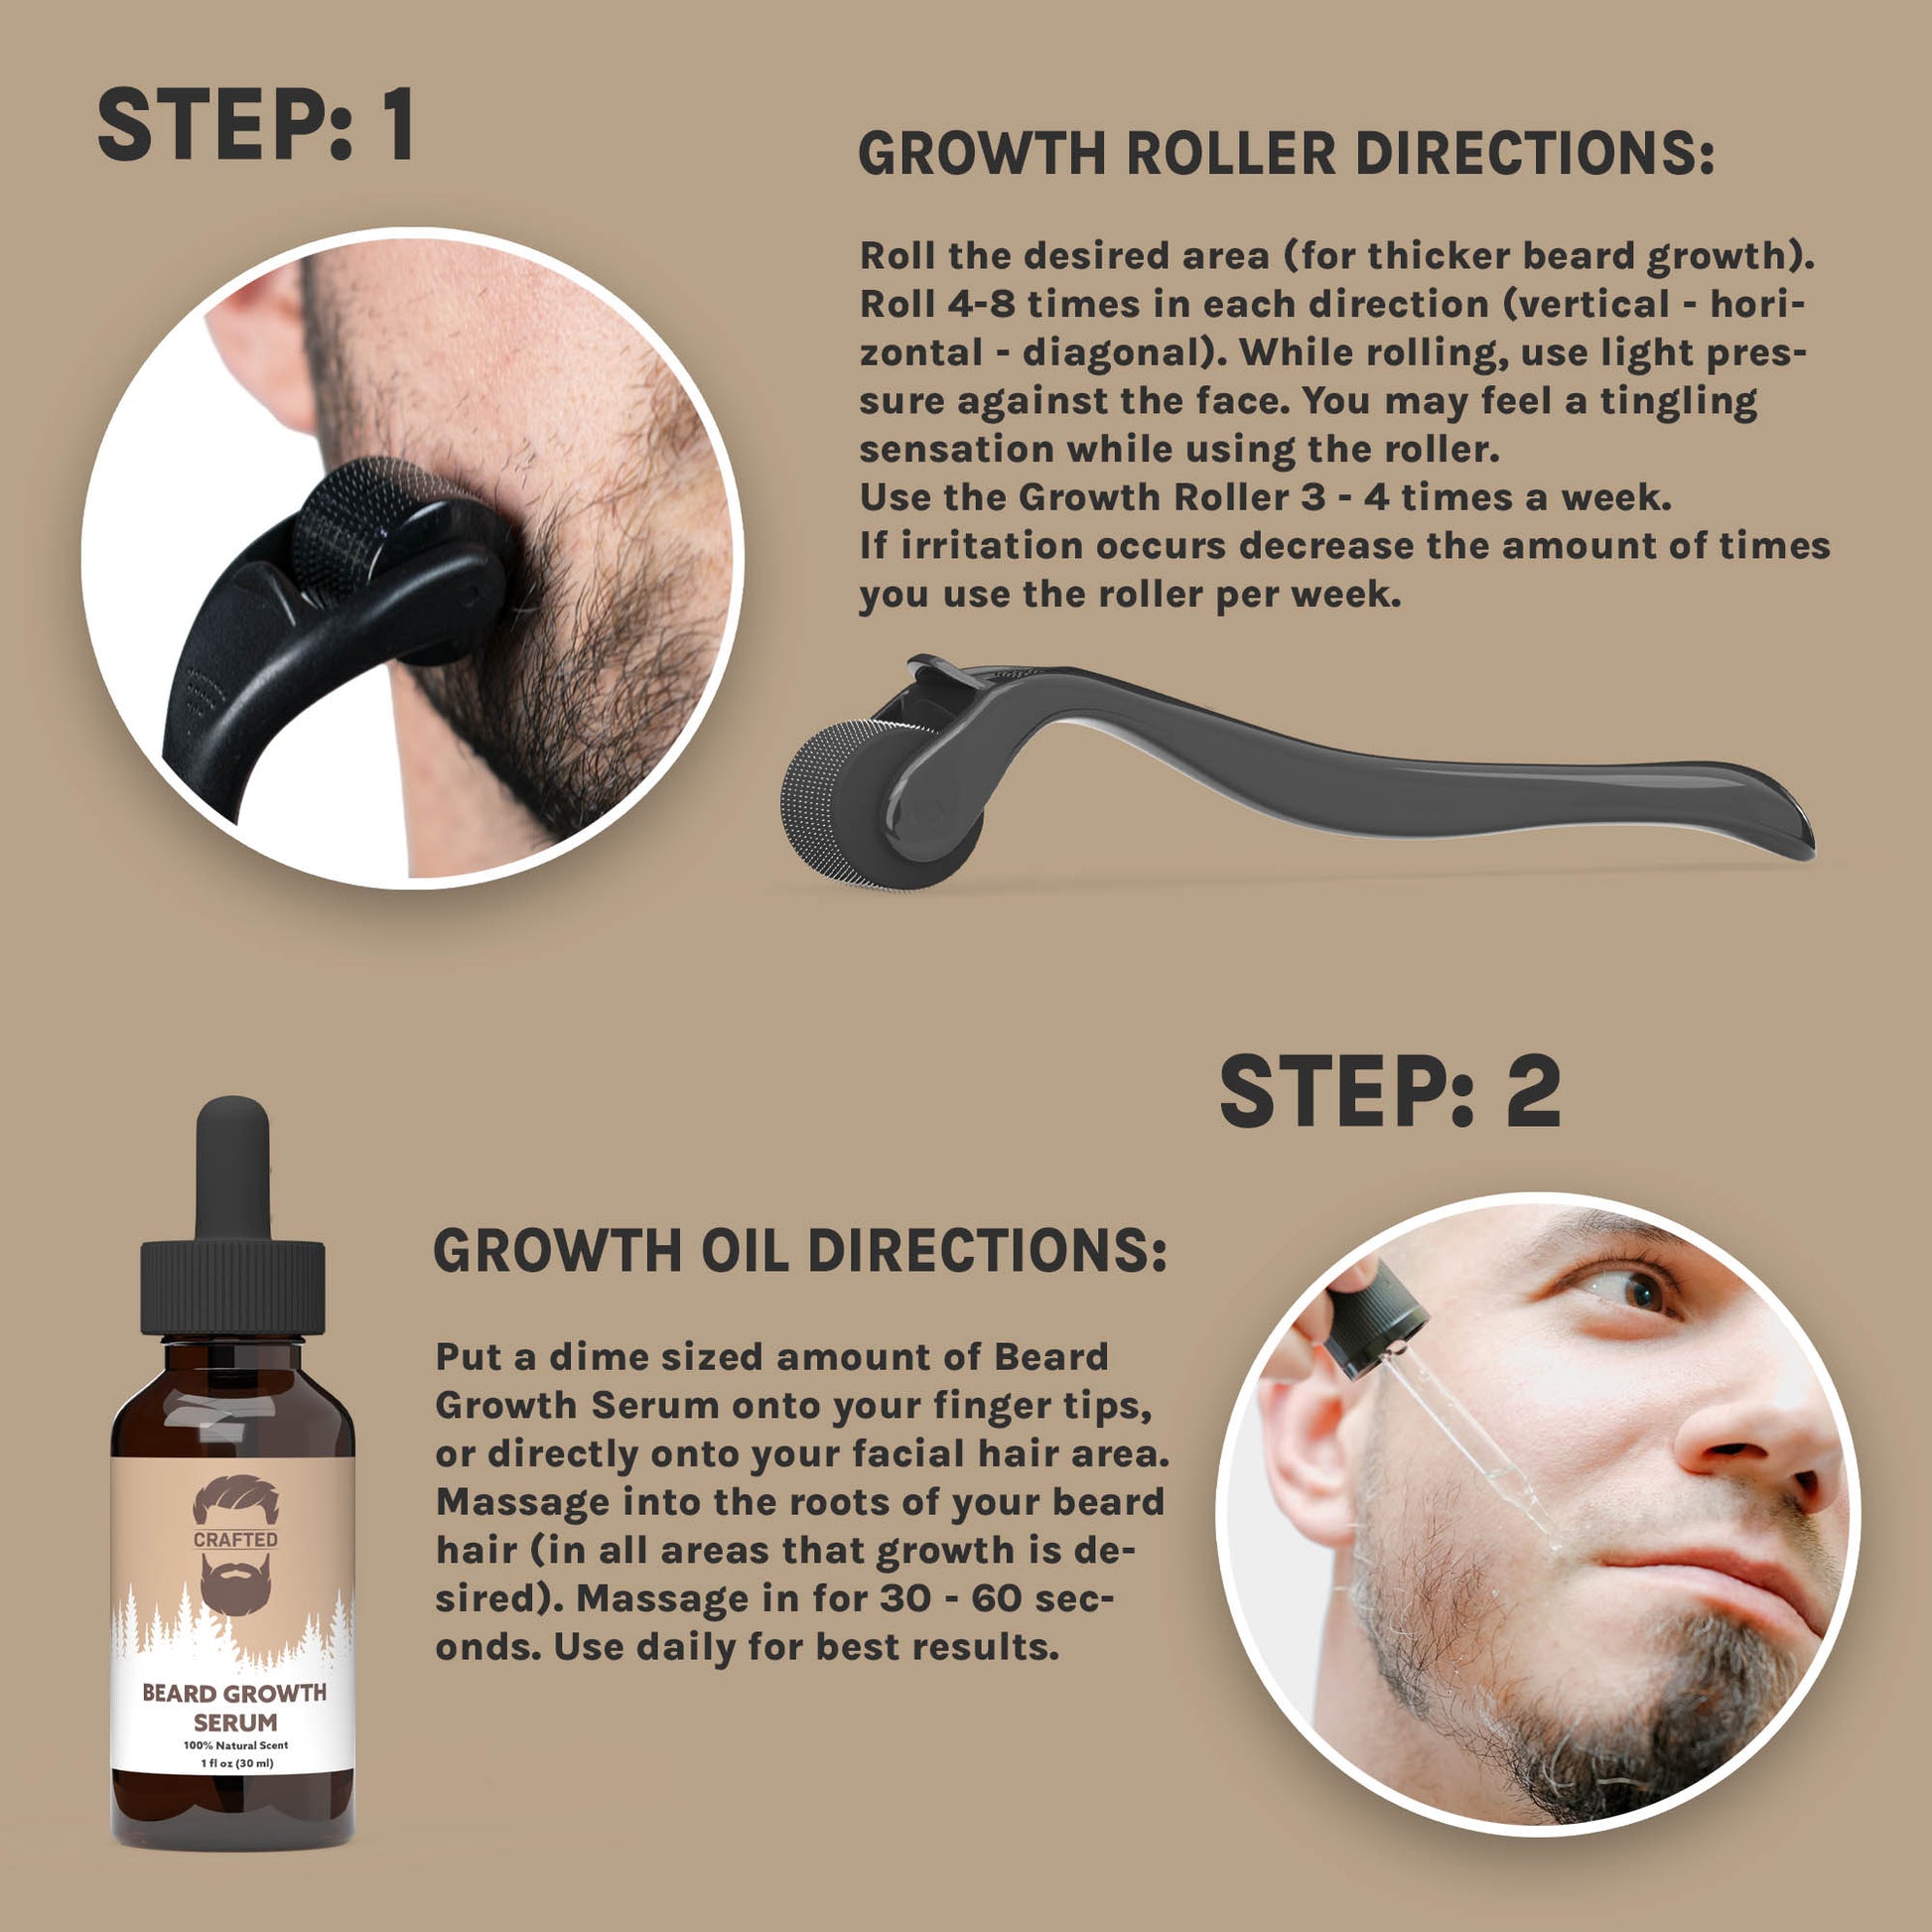 Beard Growth Kit - 1 Month - Crafted Beards